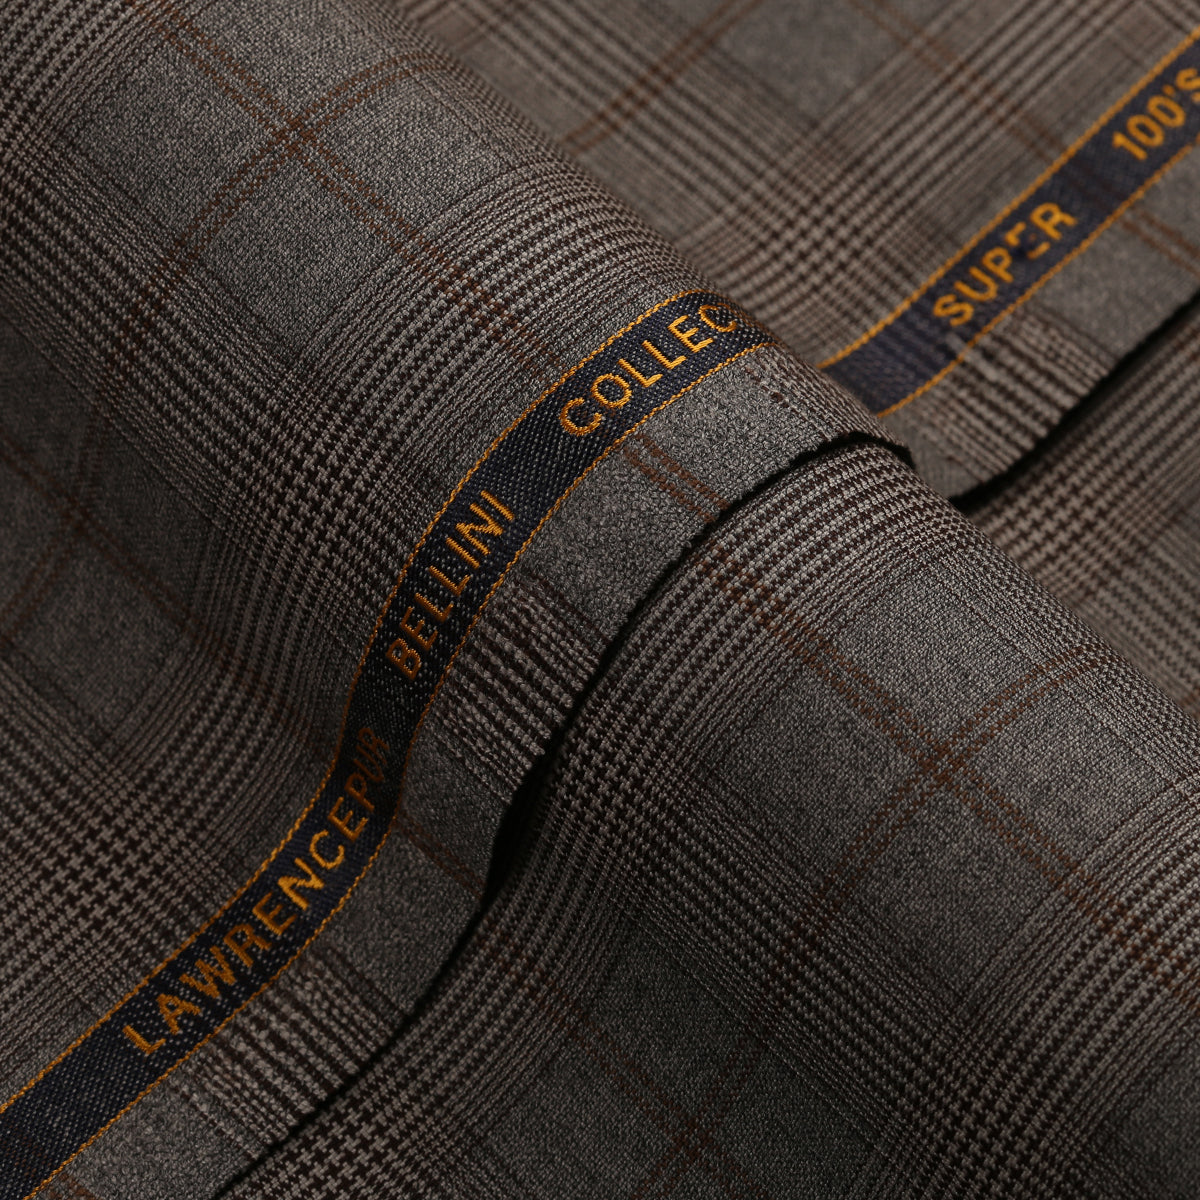 Glen Plaid Checks-Carbon Grey, S 100s Pure Wool, Bellini Suiting Fabric